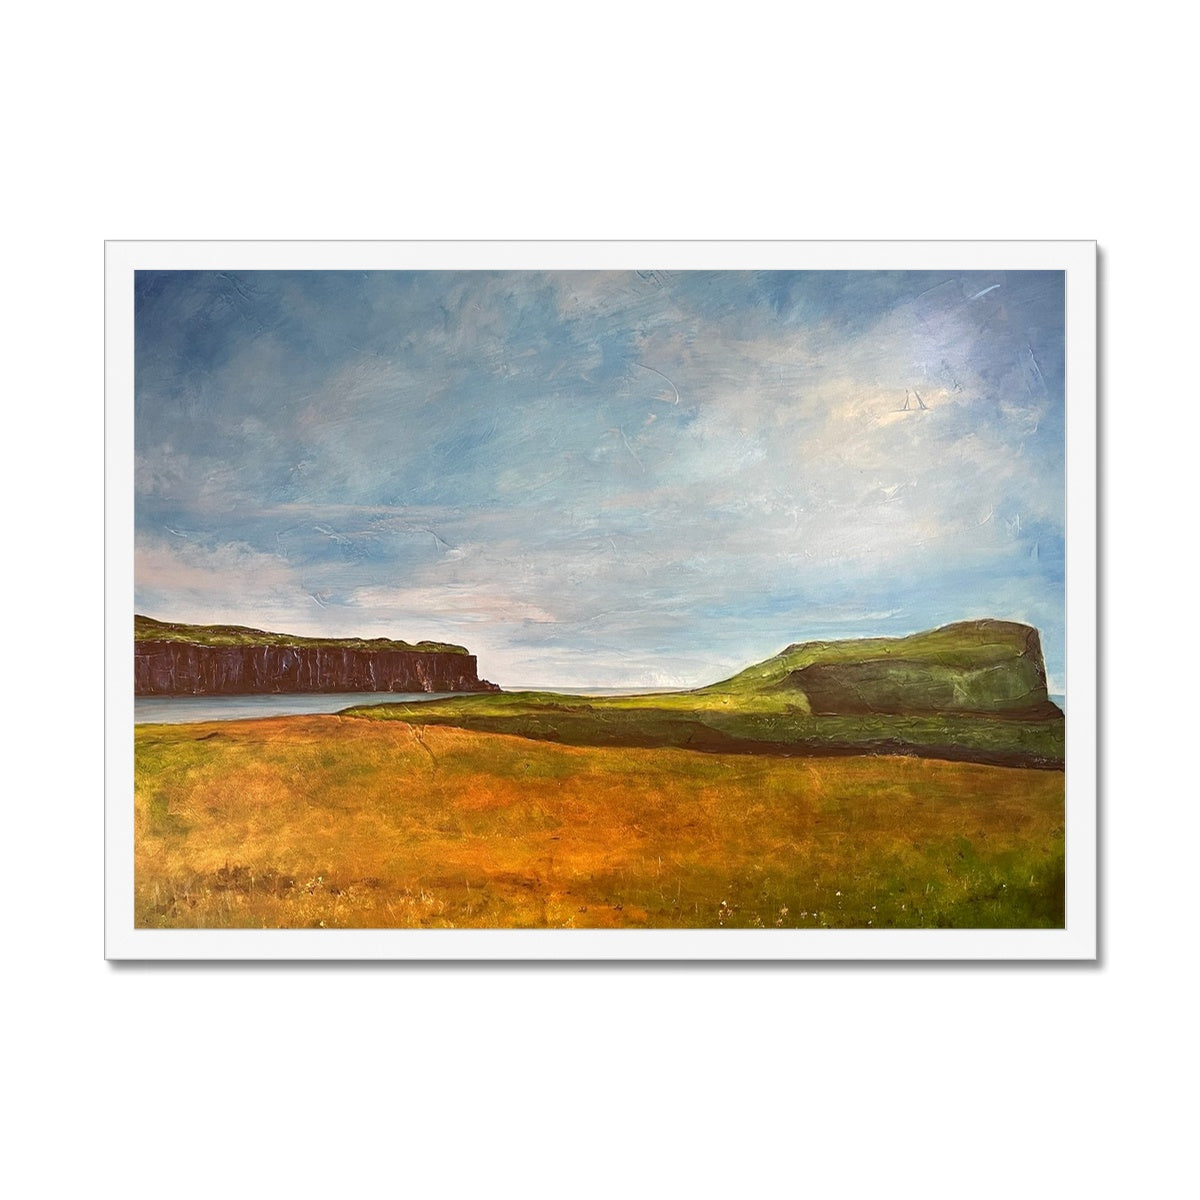 Approaching Oronsay Skye Painting | Framed Prints From Scotland-Framed Prints-Skye Art Gallery-A2 Landscape-White Frame-Paintings, Prints, Homeware, Art Gifts From Scotland By Scottish Artist Kevin Hunter